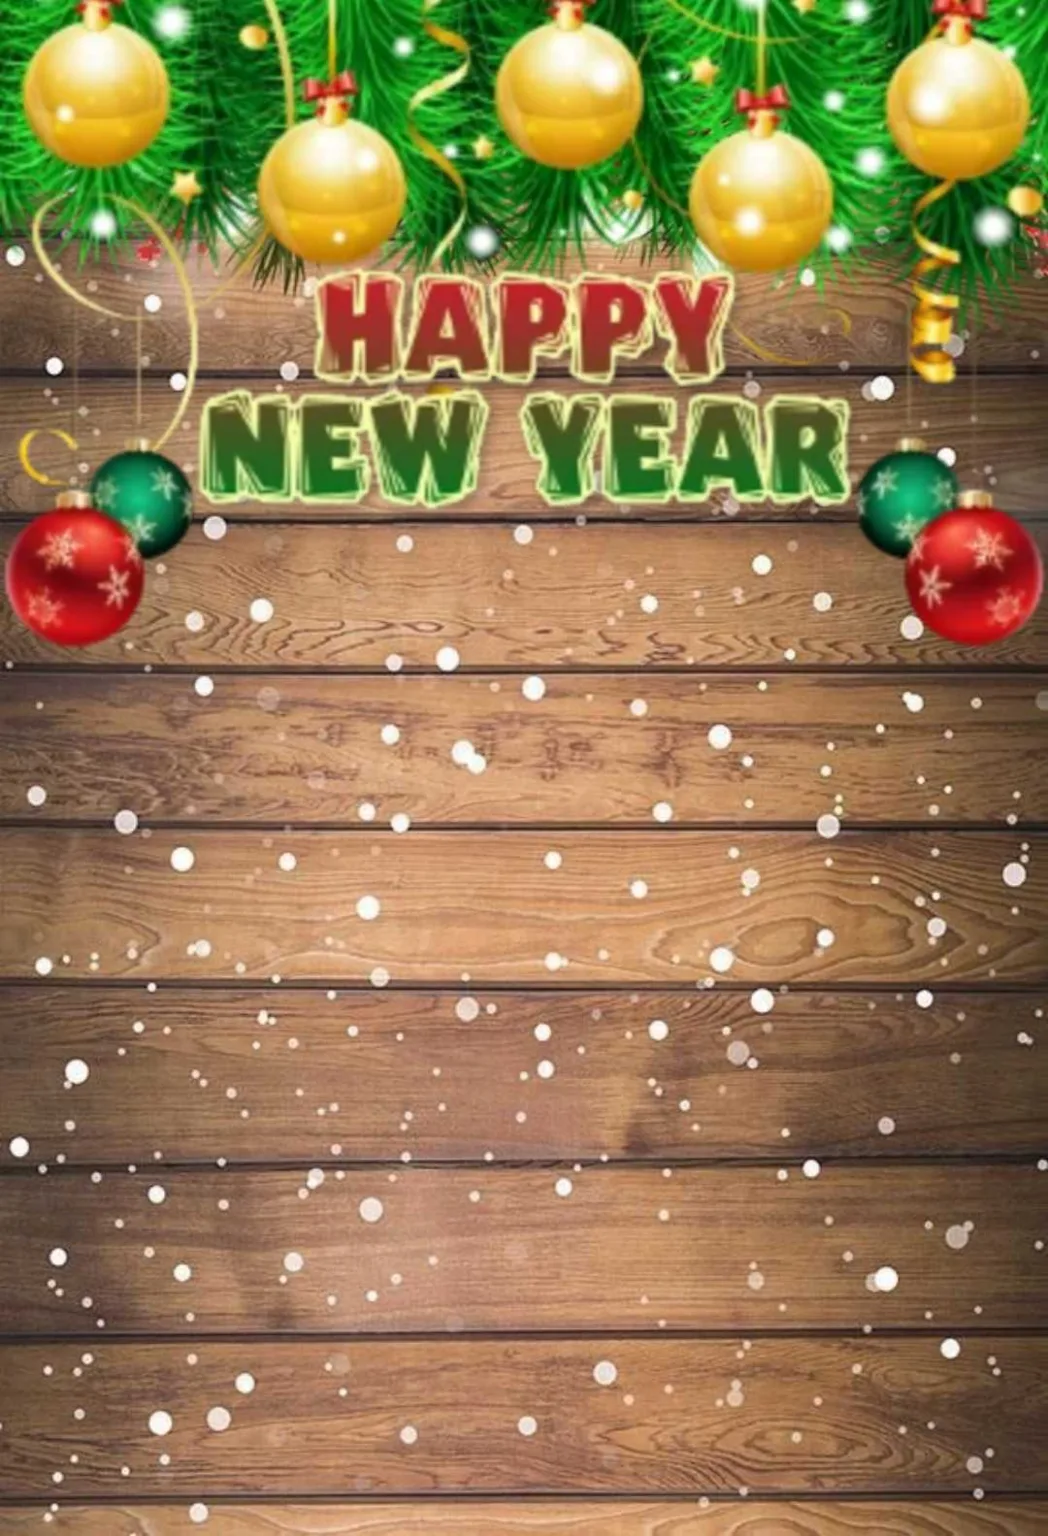 CB new year background for editing